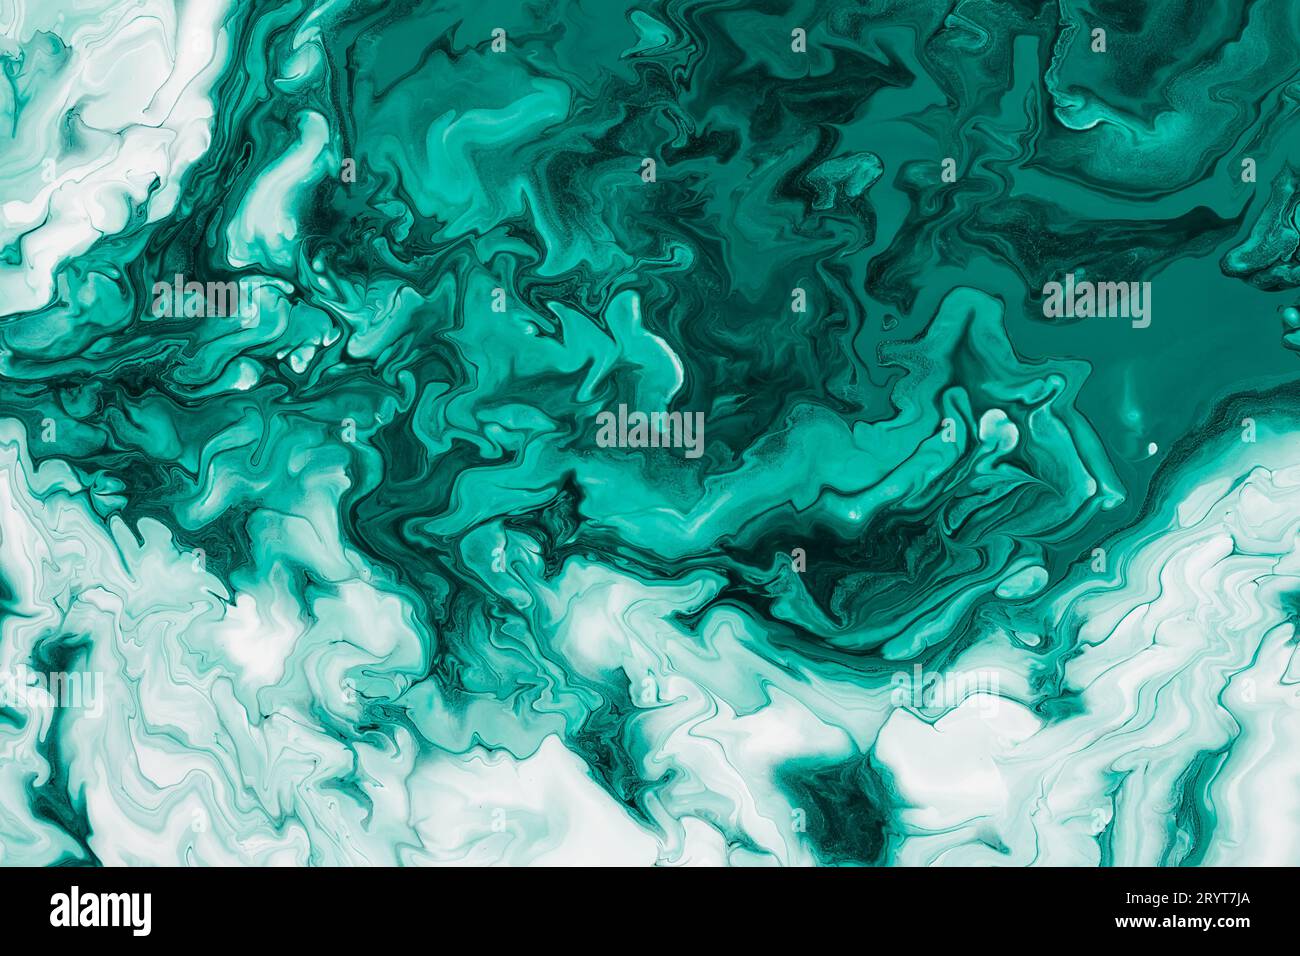 Abstract marble background or texture. Free flowing green and white acrylic paint. Random Waves and Curls Stock Photo